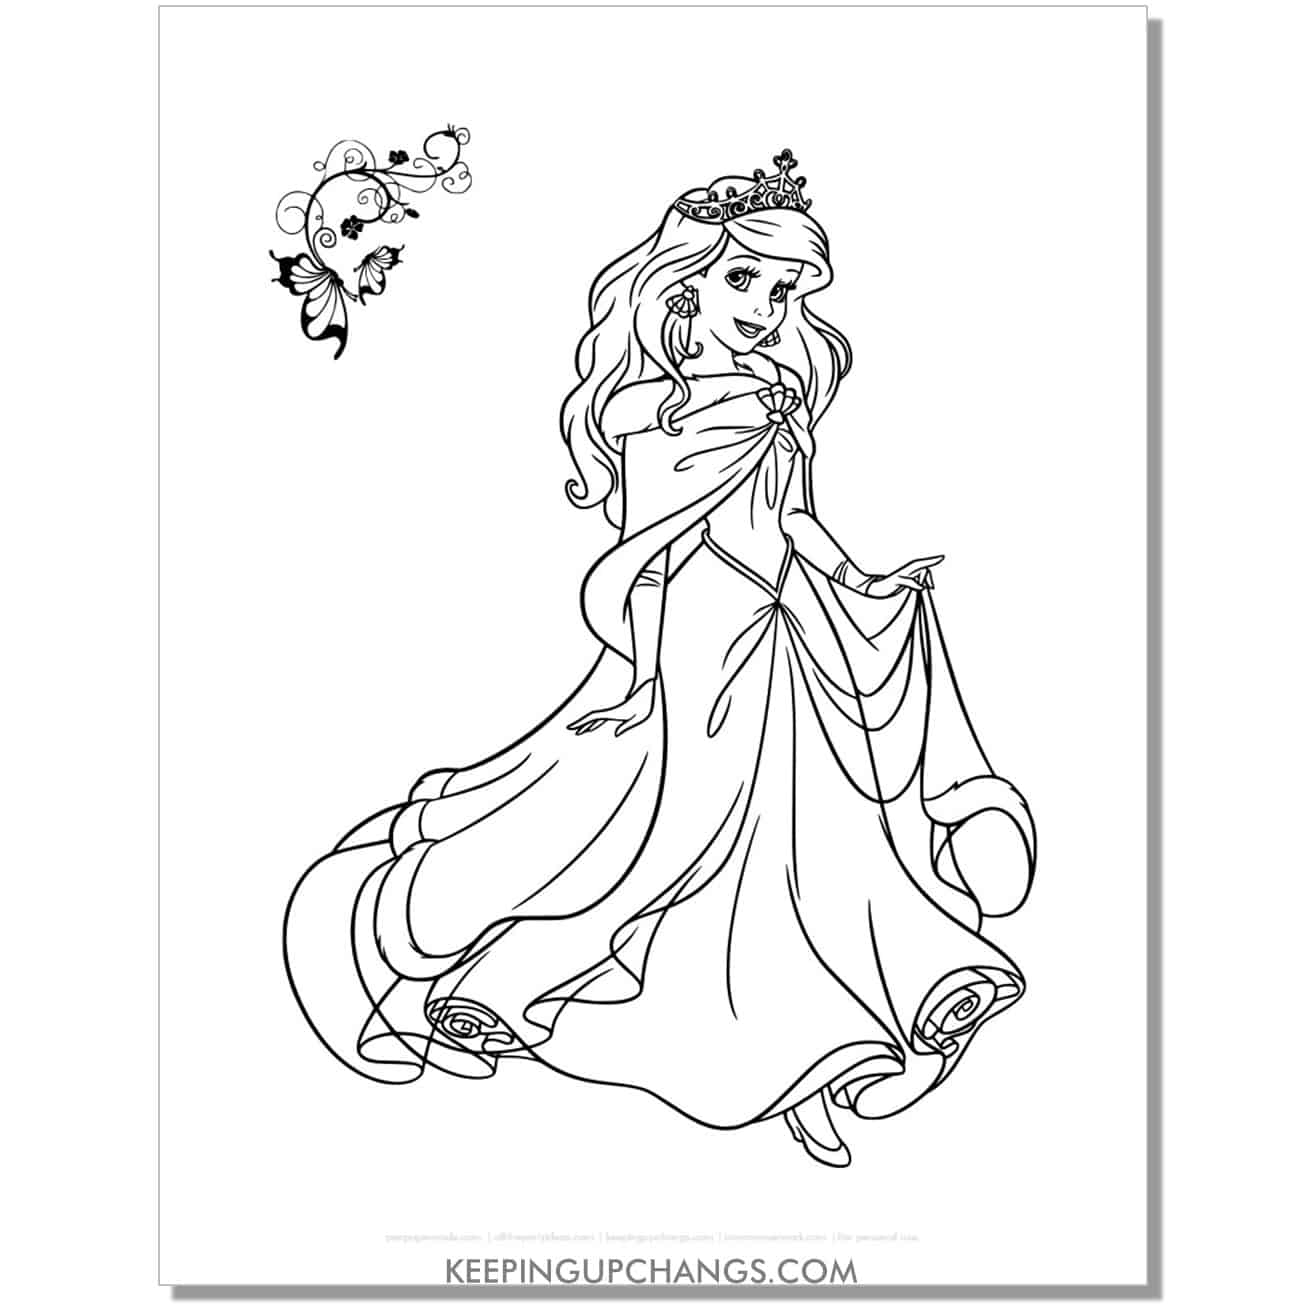 little mermaid ariel in princess tiara and gown dress coloring page, sheet.